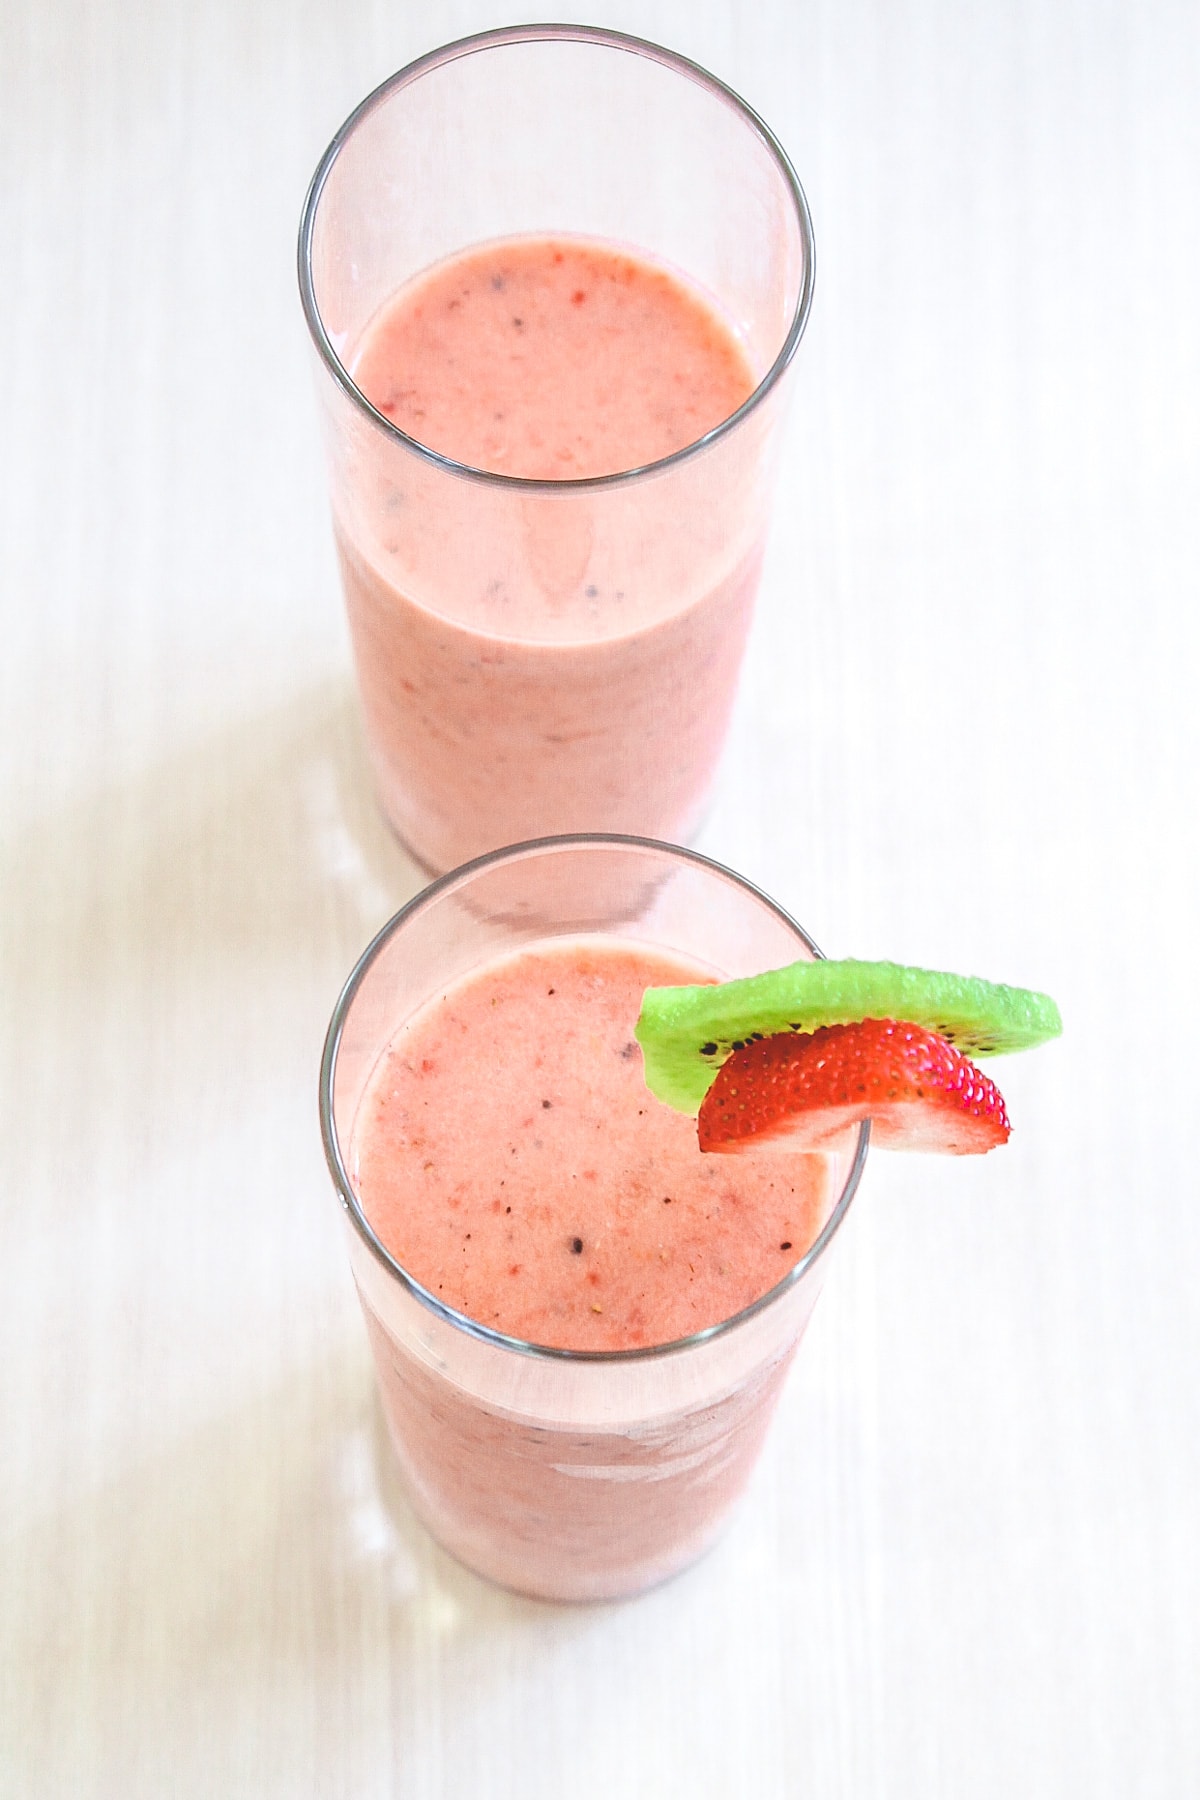 2 glasses of strawberry kiwi smoothie and one glass garnished with slice strawberry and kiwi.